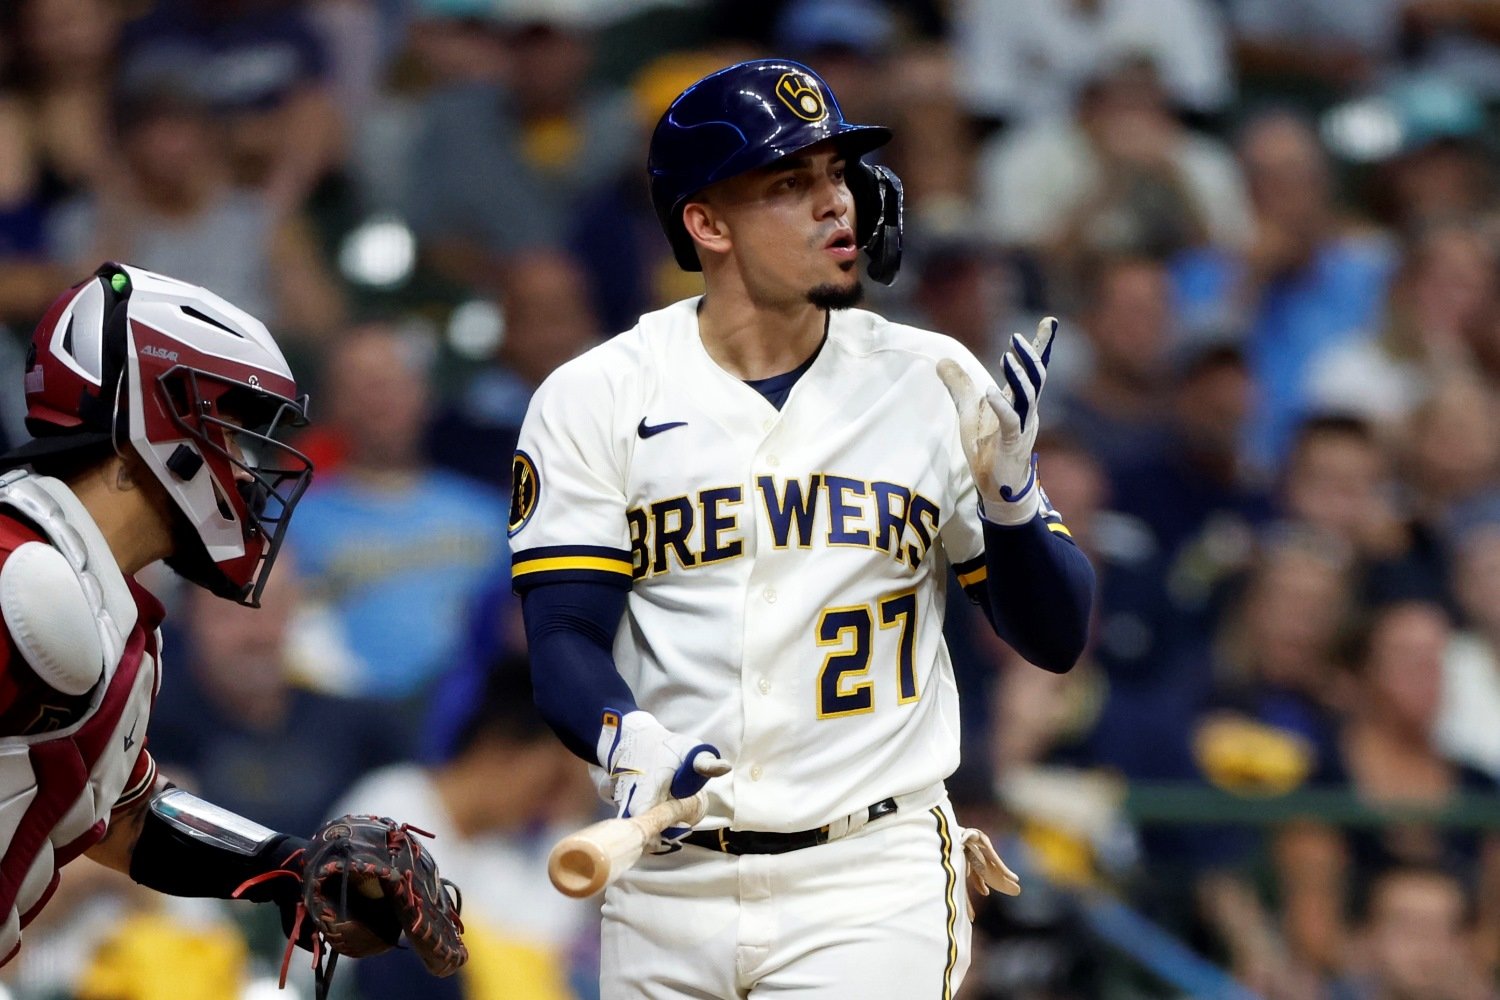 April 8, 2023: Milwaukee Brewers shortstop Willy Adames (27